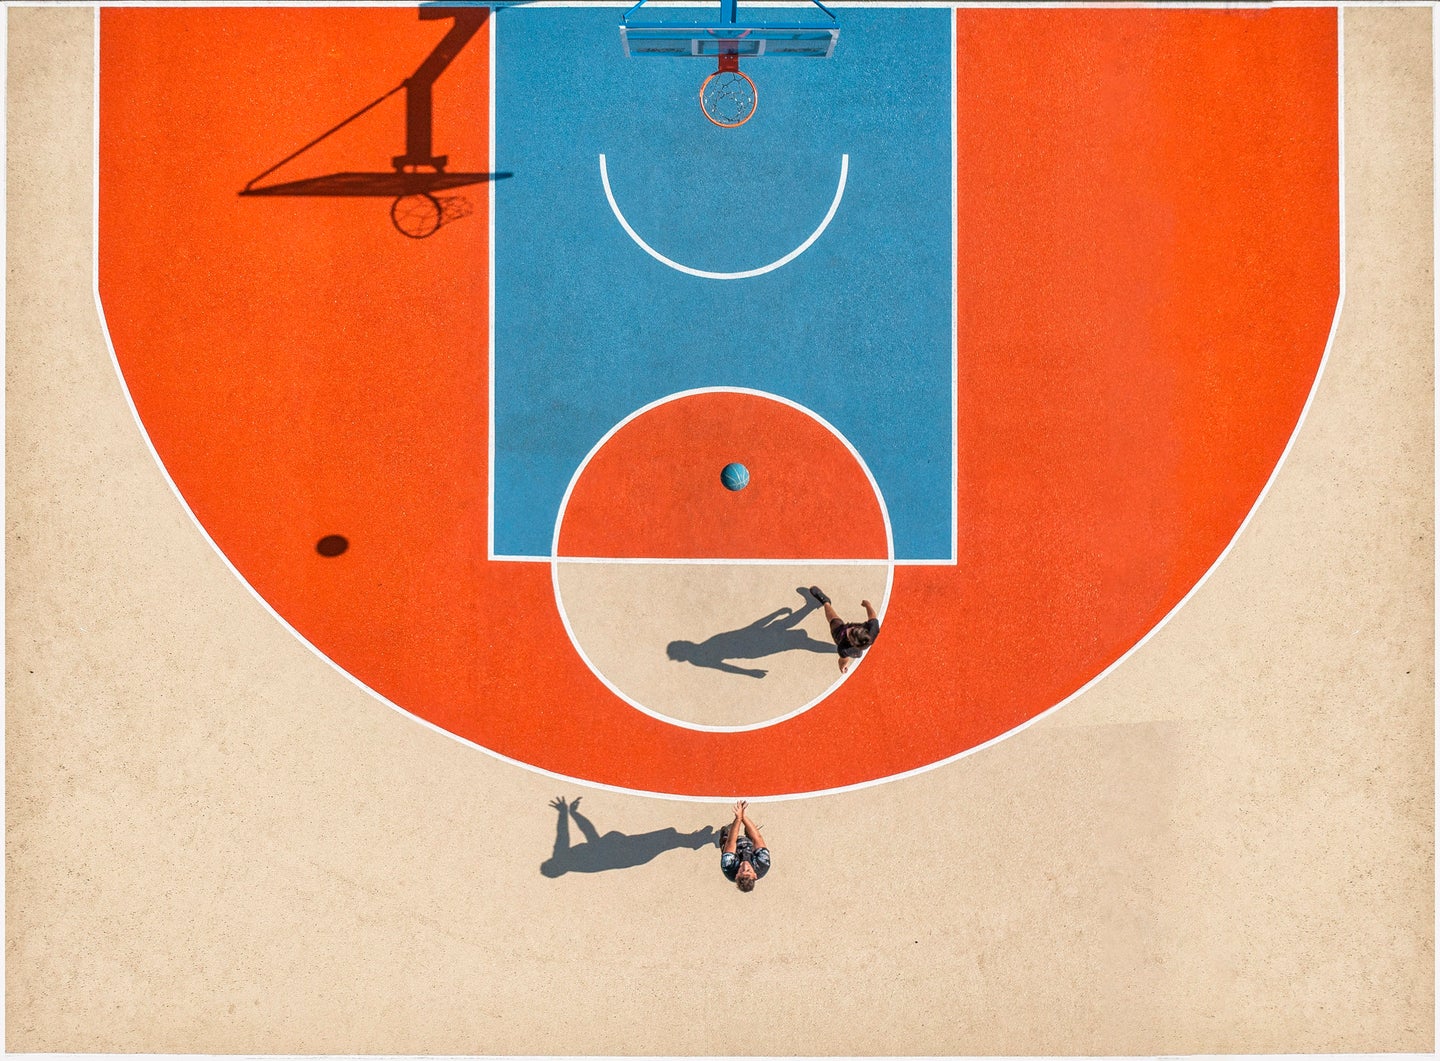 Two people on an orange, blue, and tan basketball court, from above.